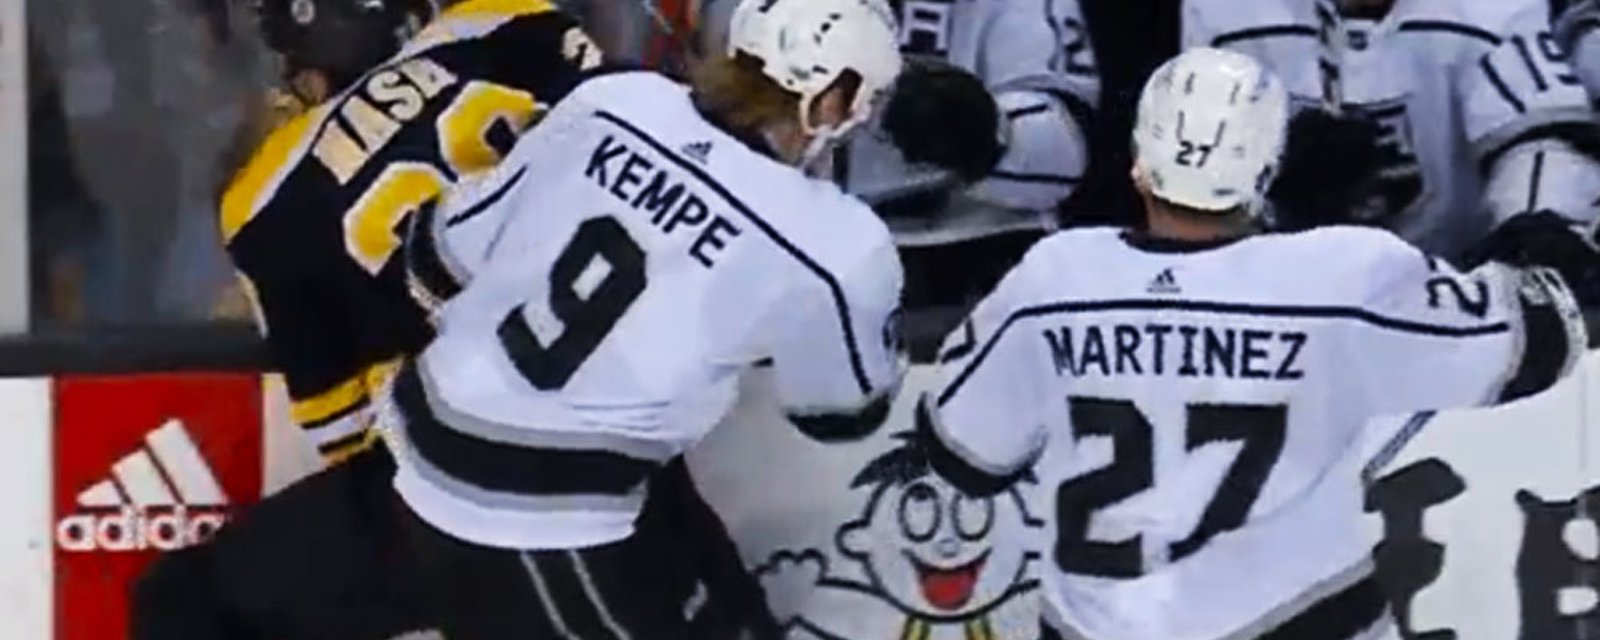 Kempe unleashes vicious hit to the head, no penalty issued